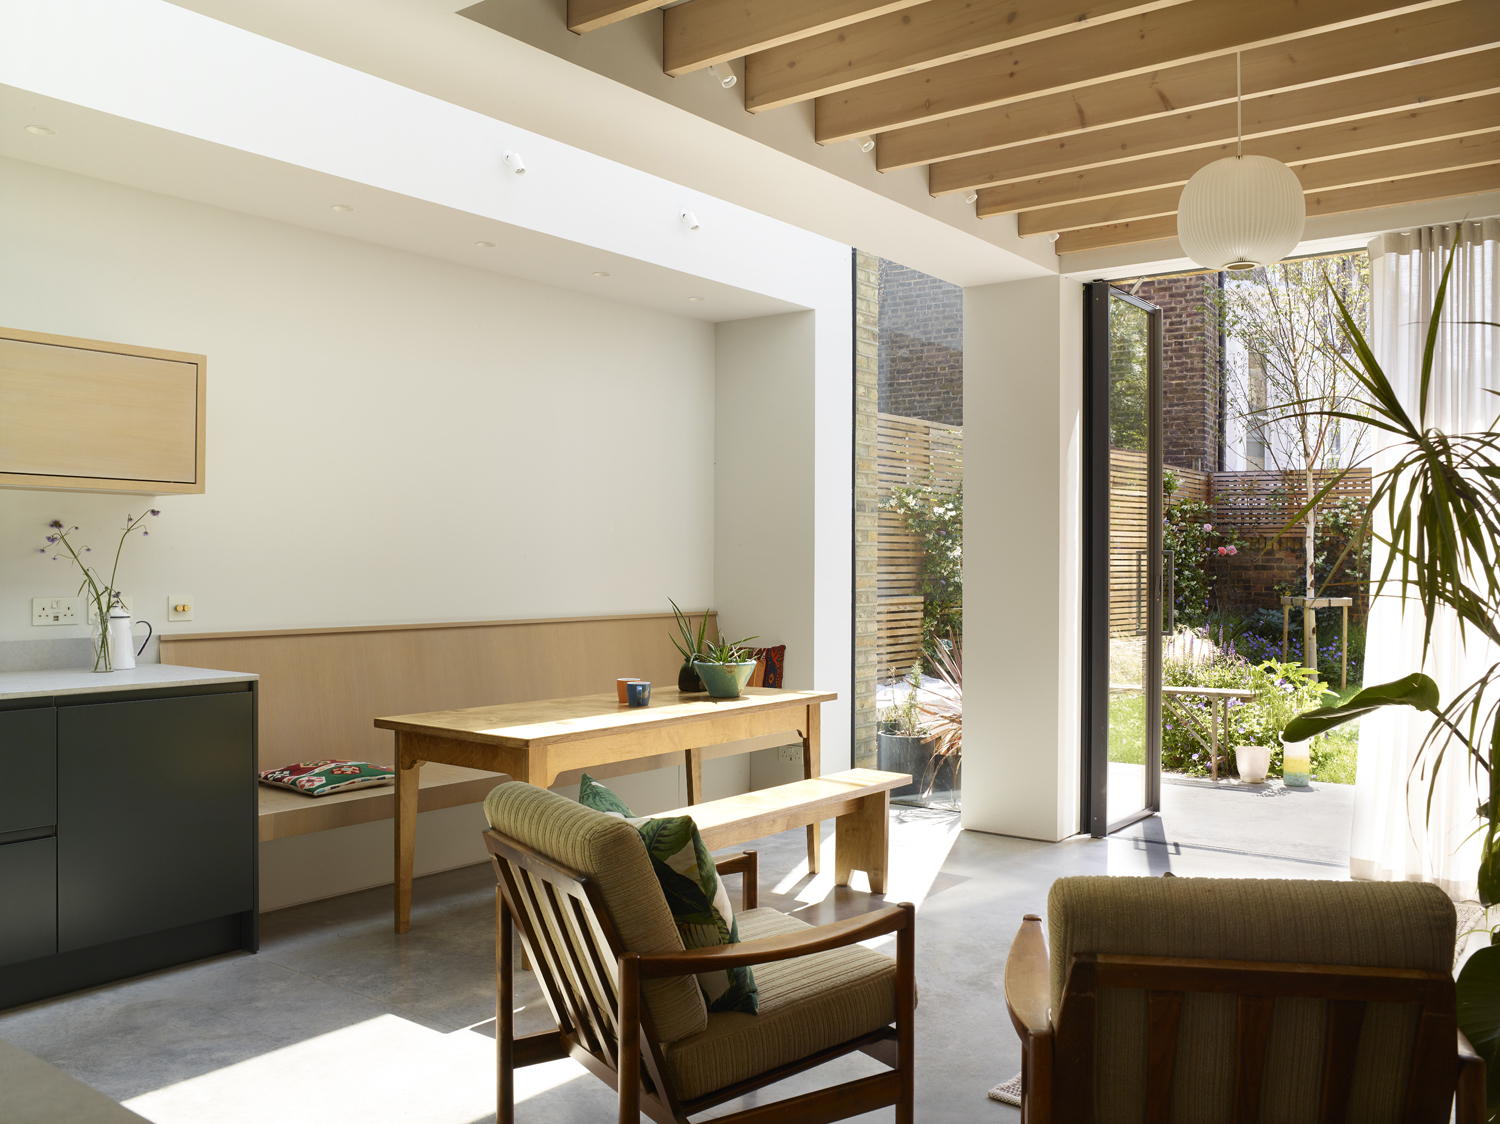 evoke projects ltd bespoke extension and custom kitchen, custom bench exposed rafters